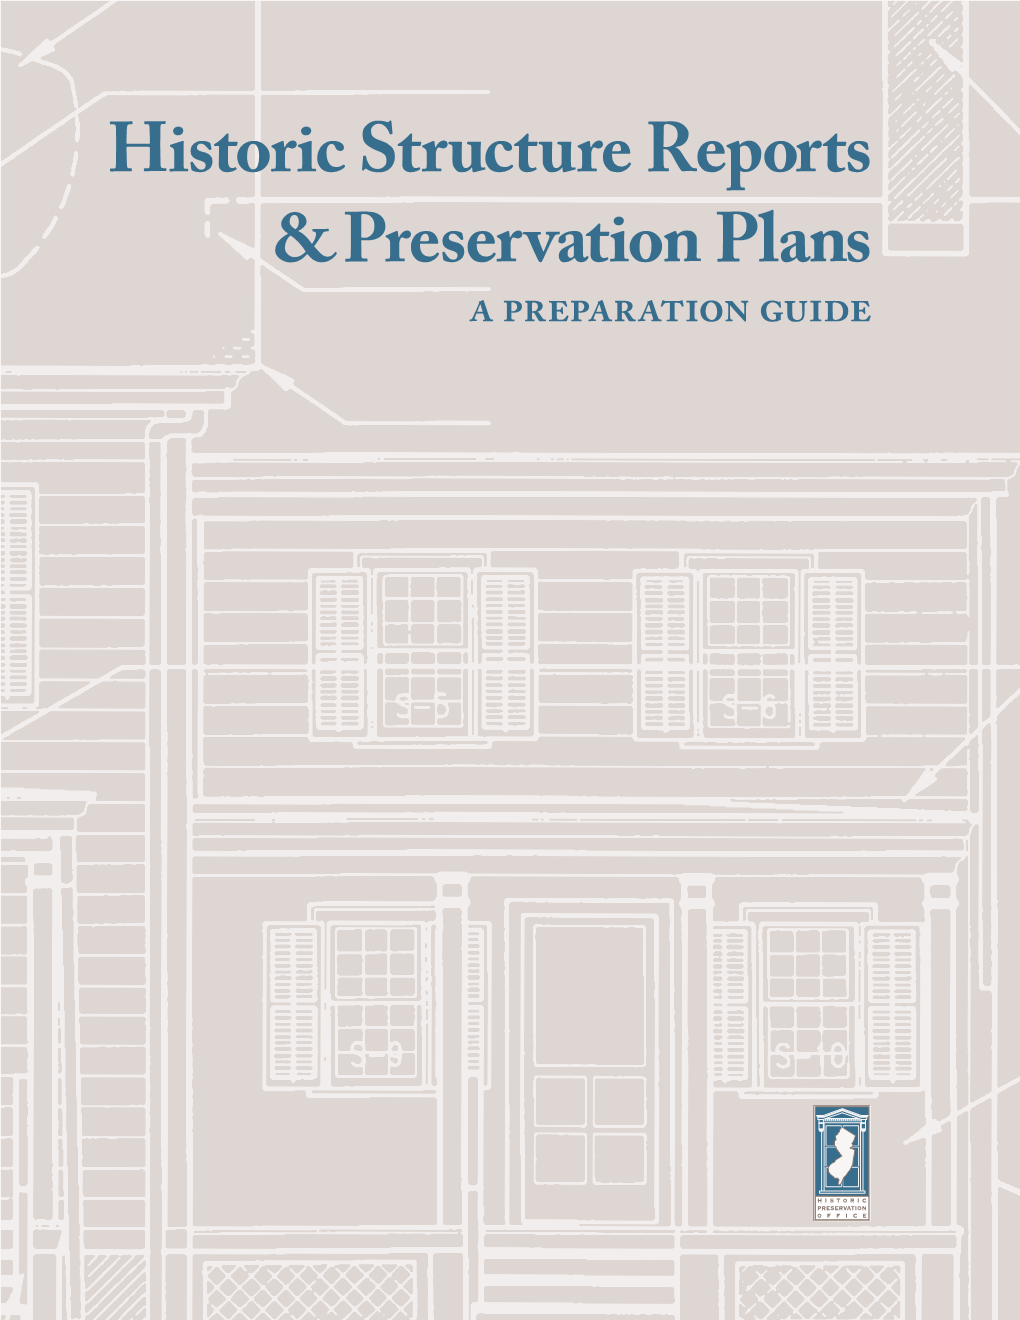 Historic Structure Reports & Preservation Plans